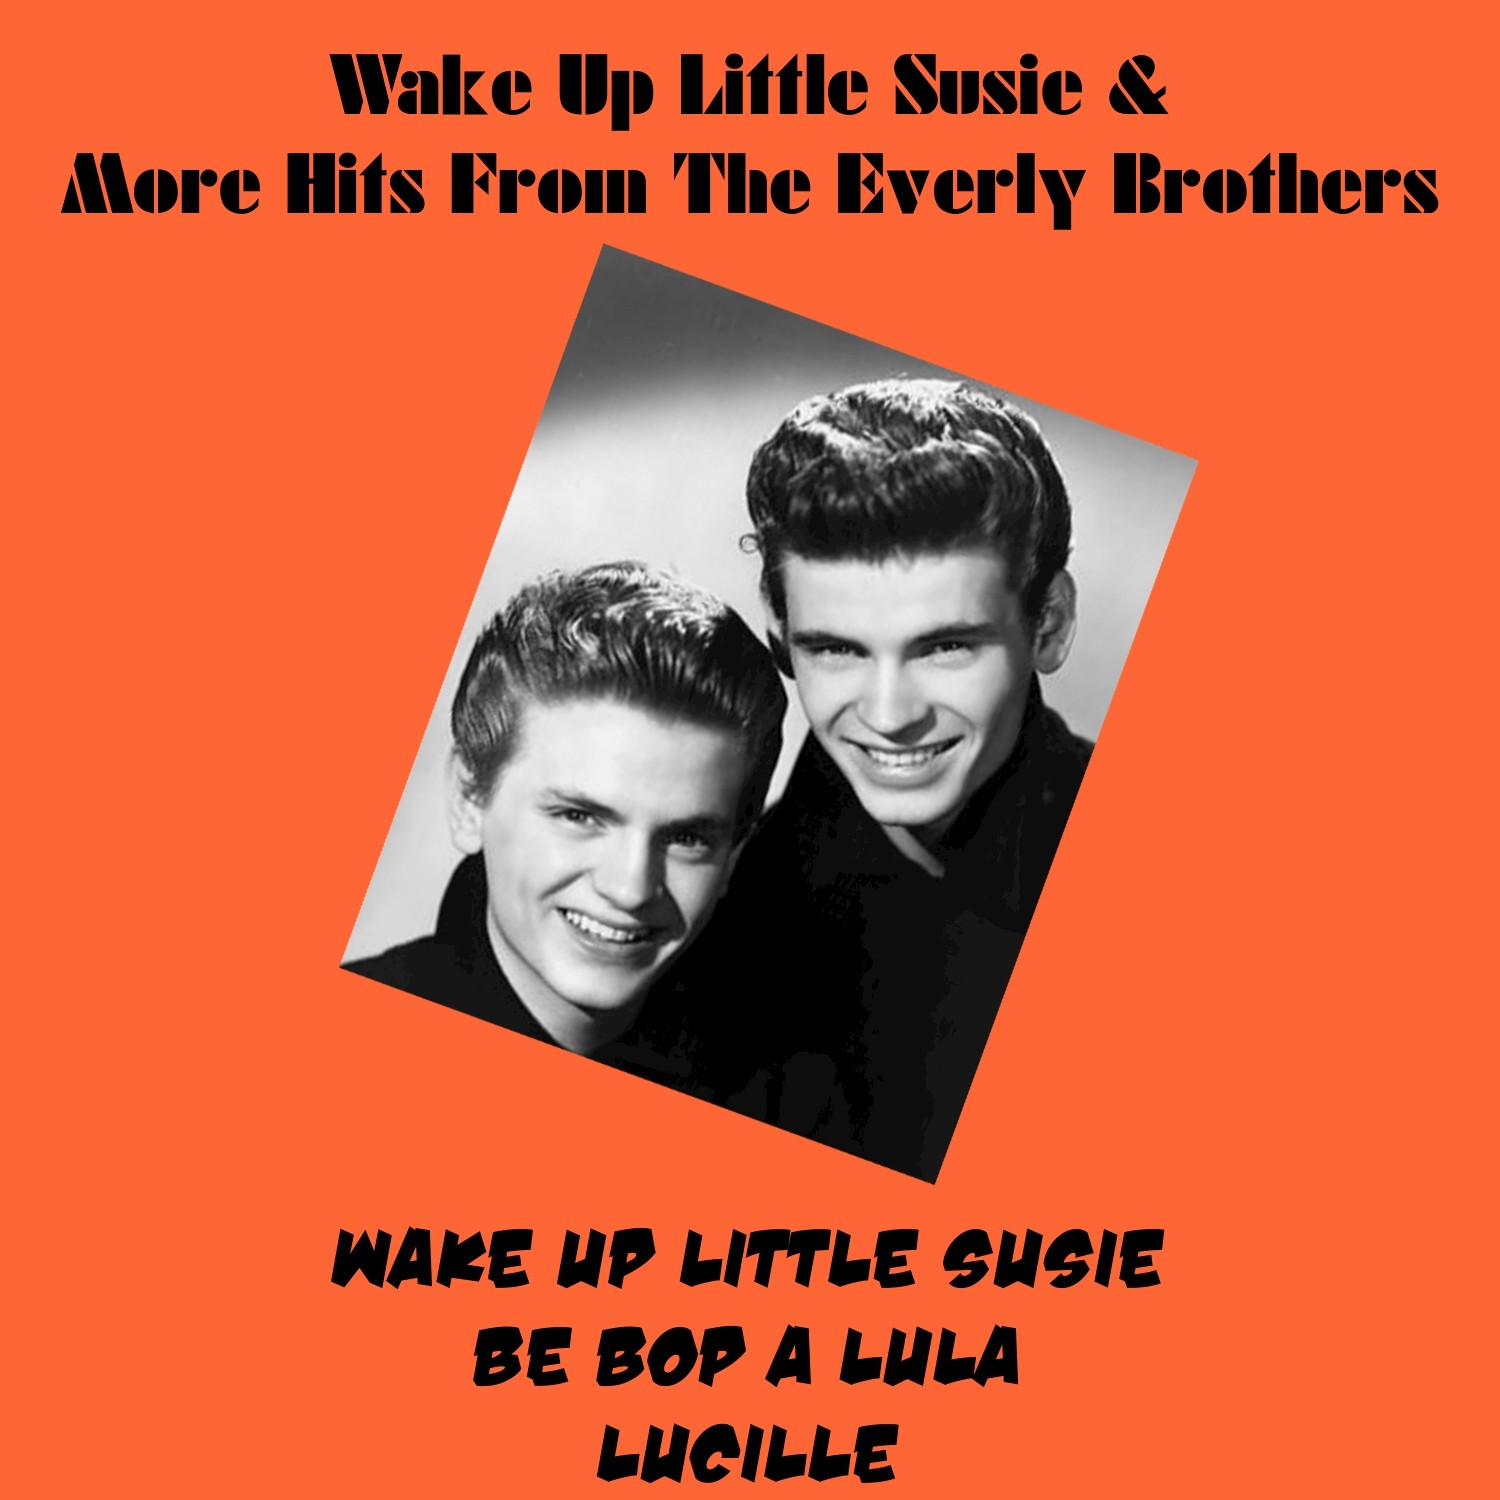 Wake up Little Susie & More Hits from the Everly Brothers